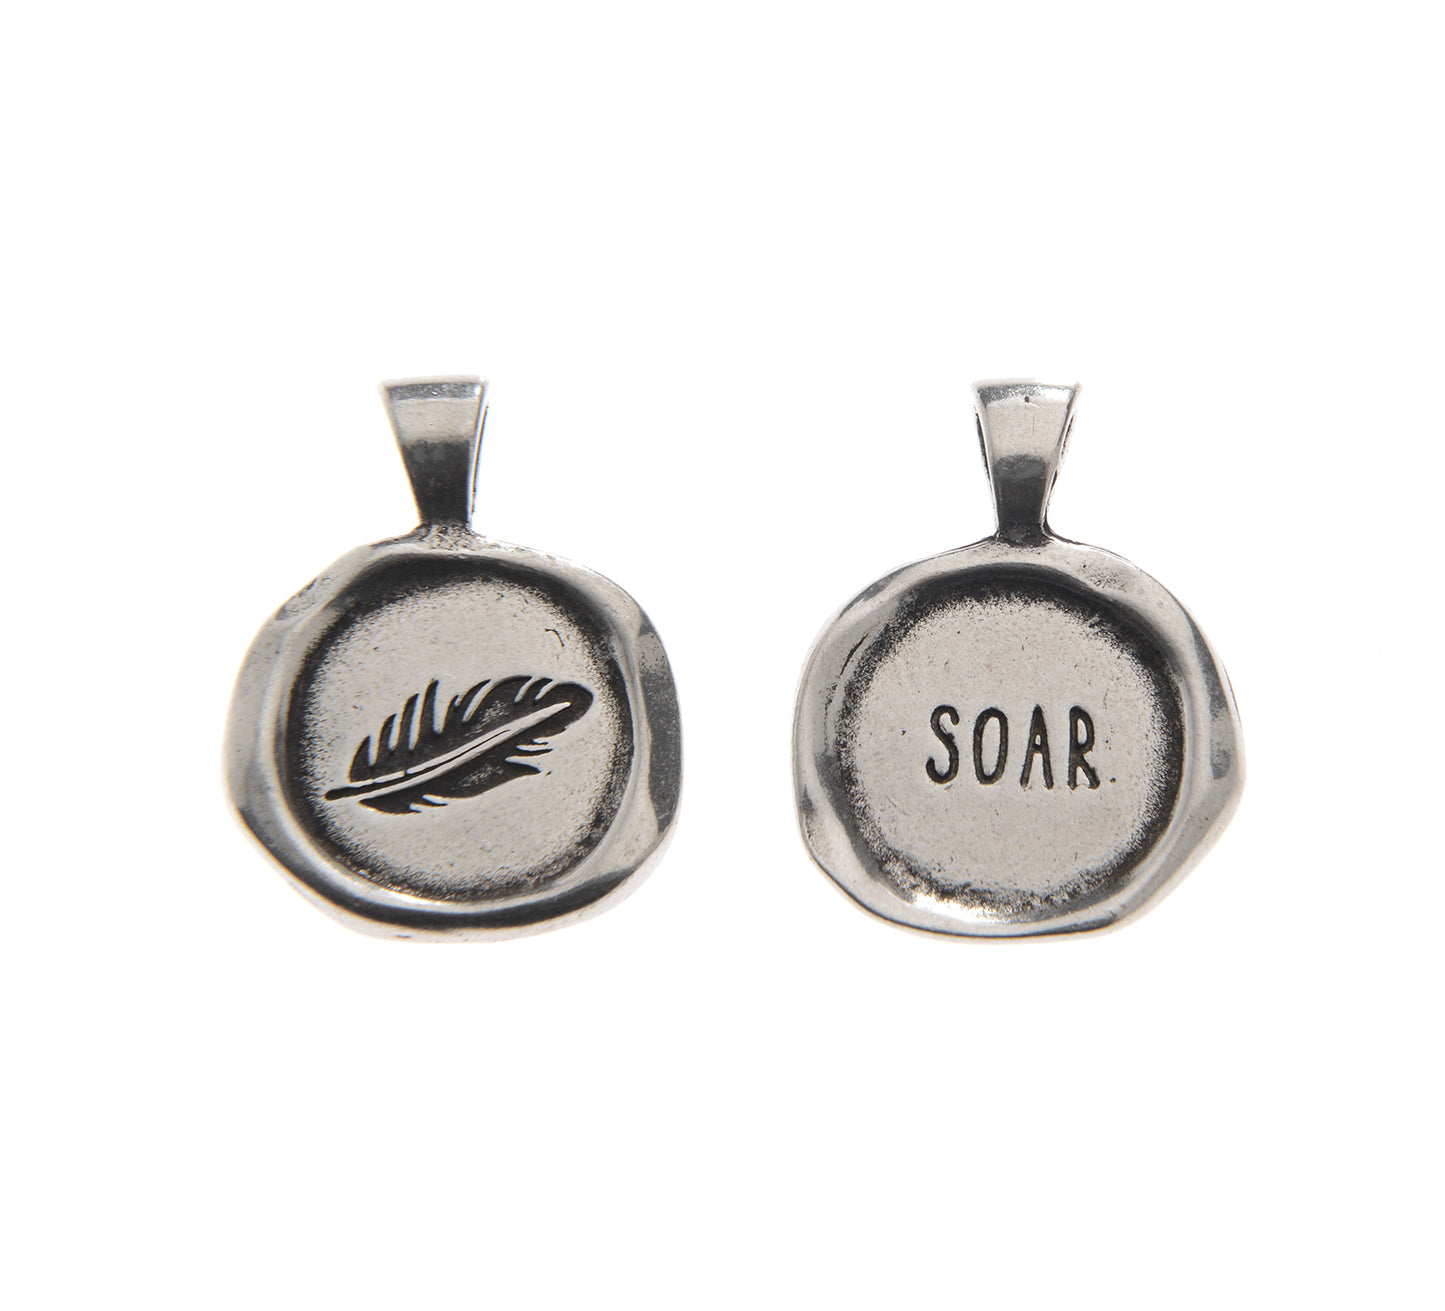 Soar Wax Seal front and back